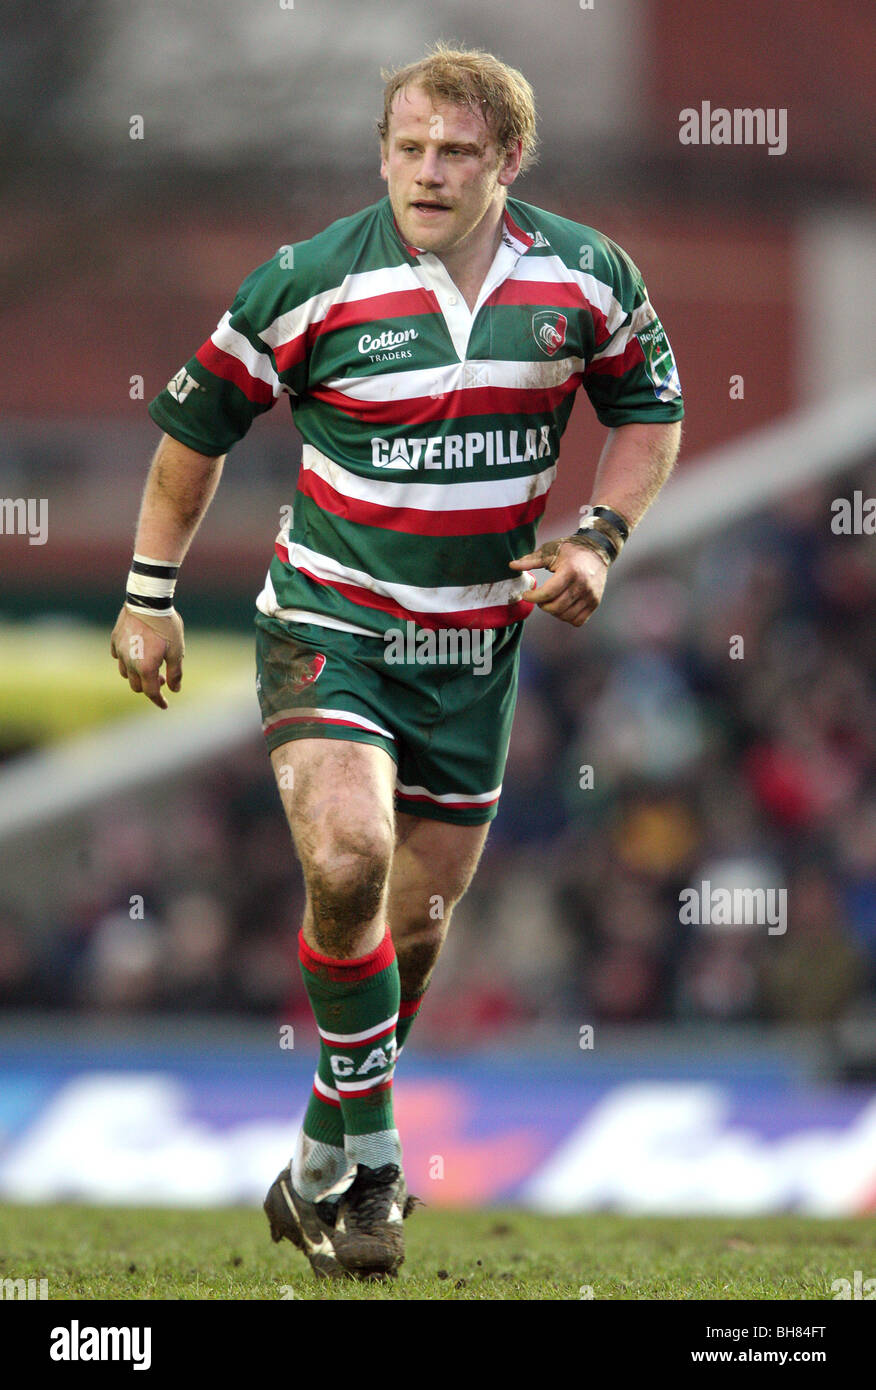 DAN COLE LEICESTER TIGERS RU WELFORD ROAD LEICESTER ENGLAND 16.01.2010 Stockfoto